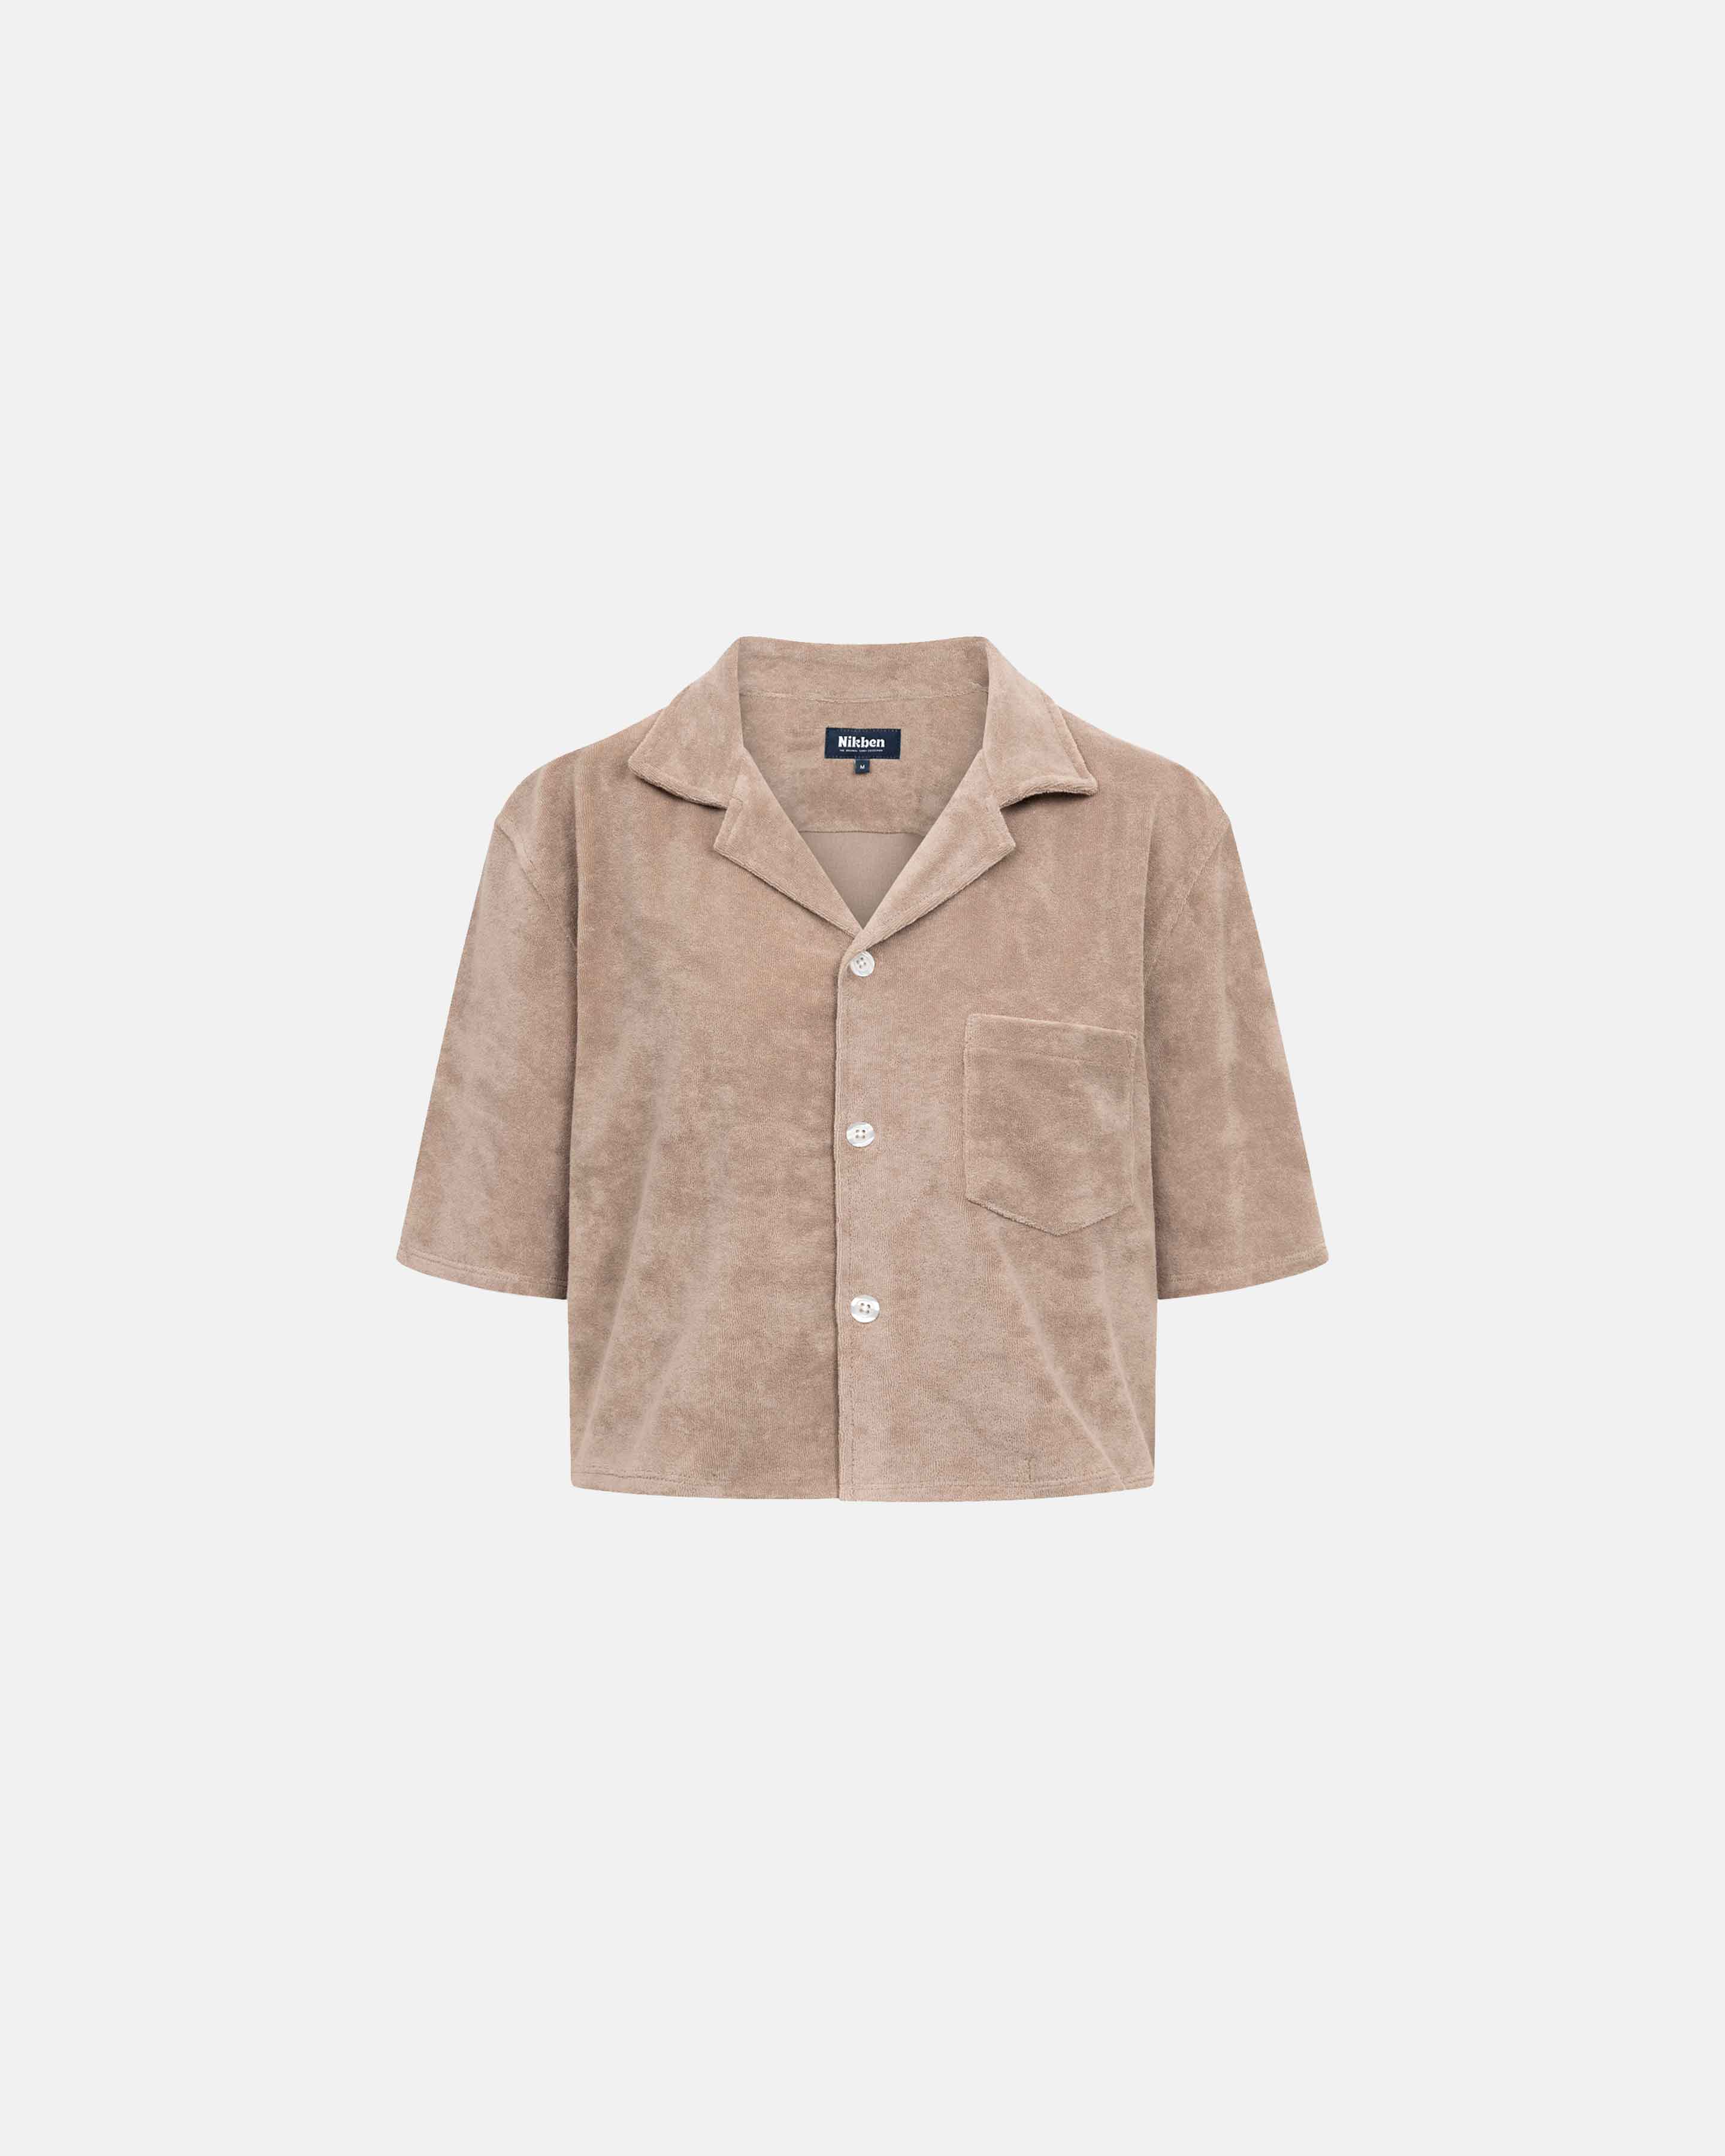 Light brown, short sleeve, cropped shirt with white button closure and one chest pocket